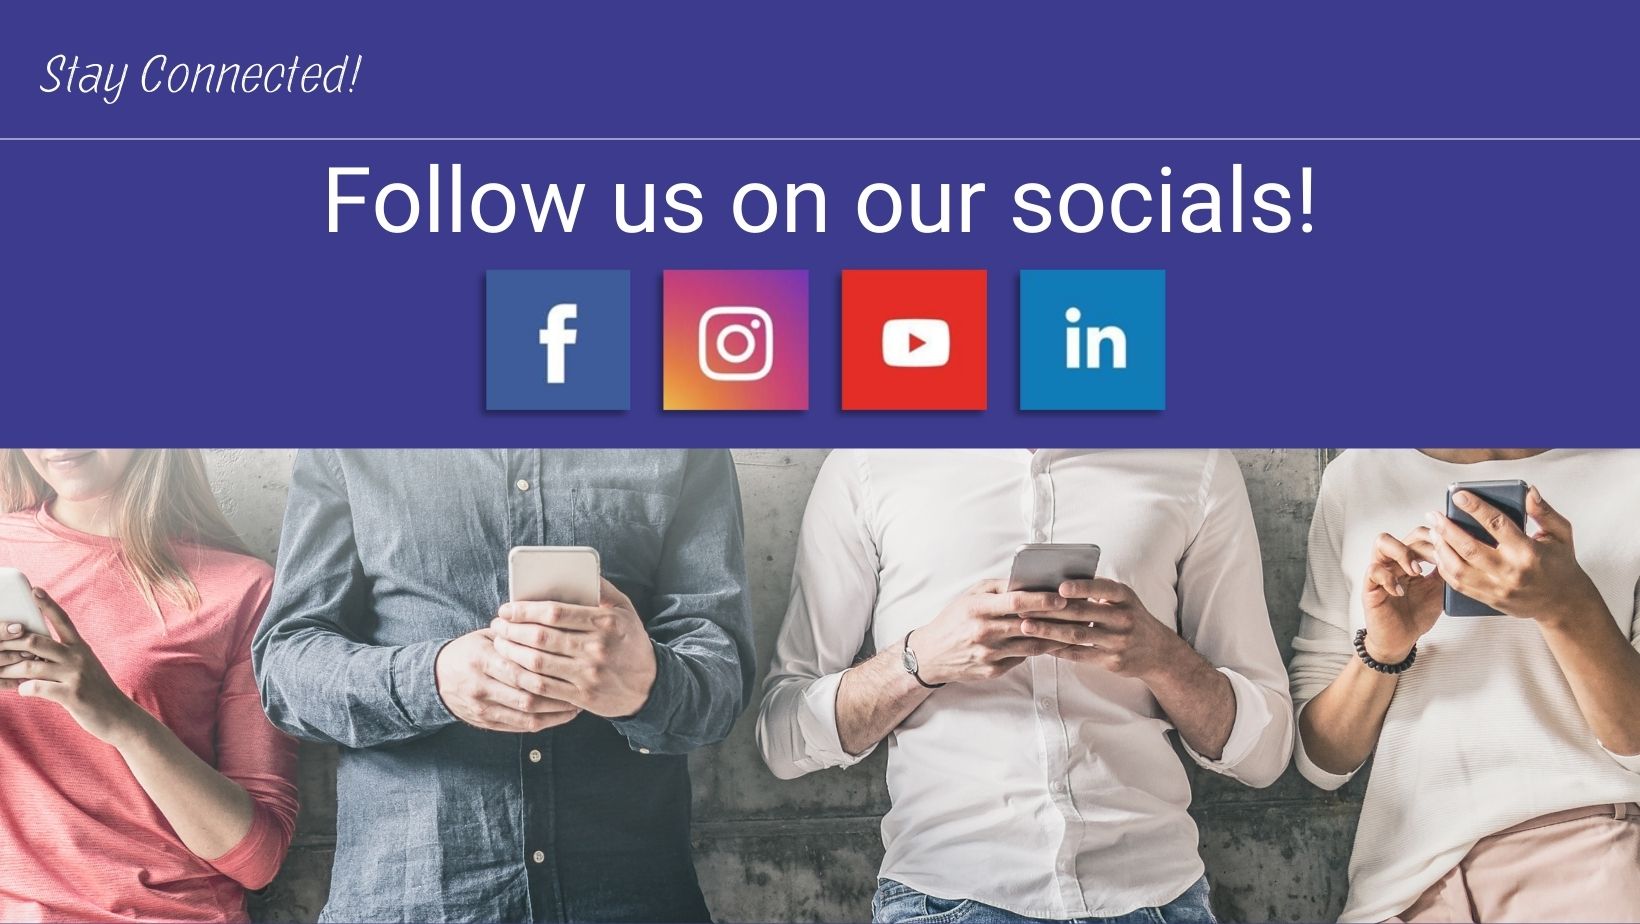 Follow us on our social media channels